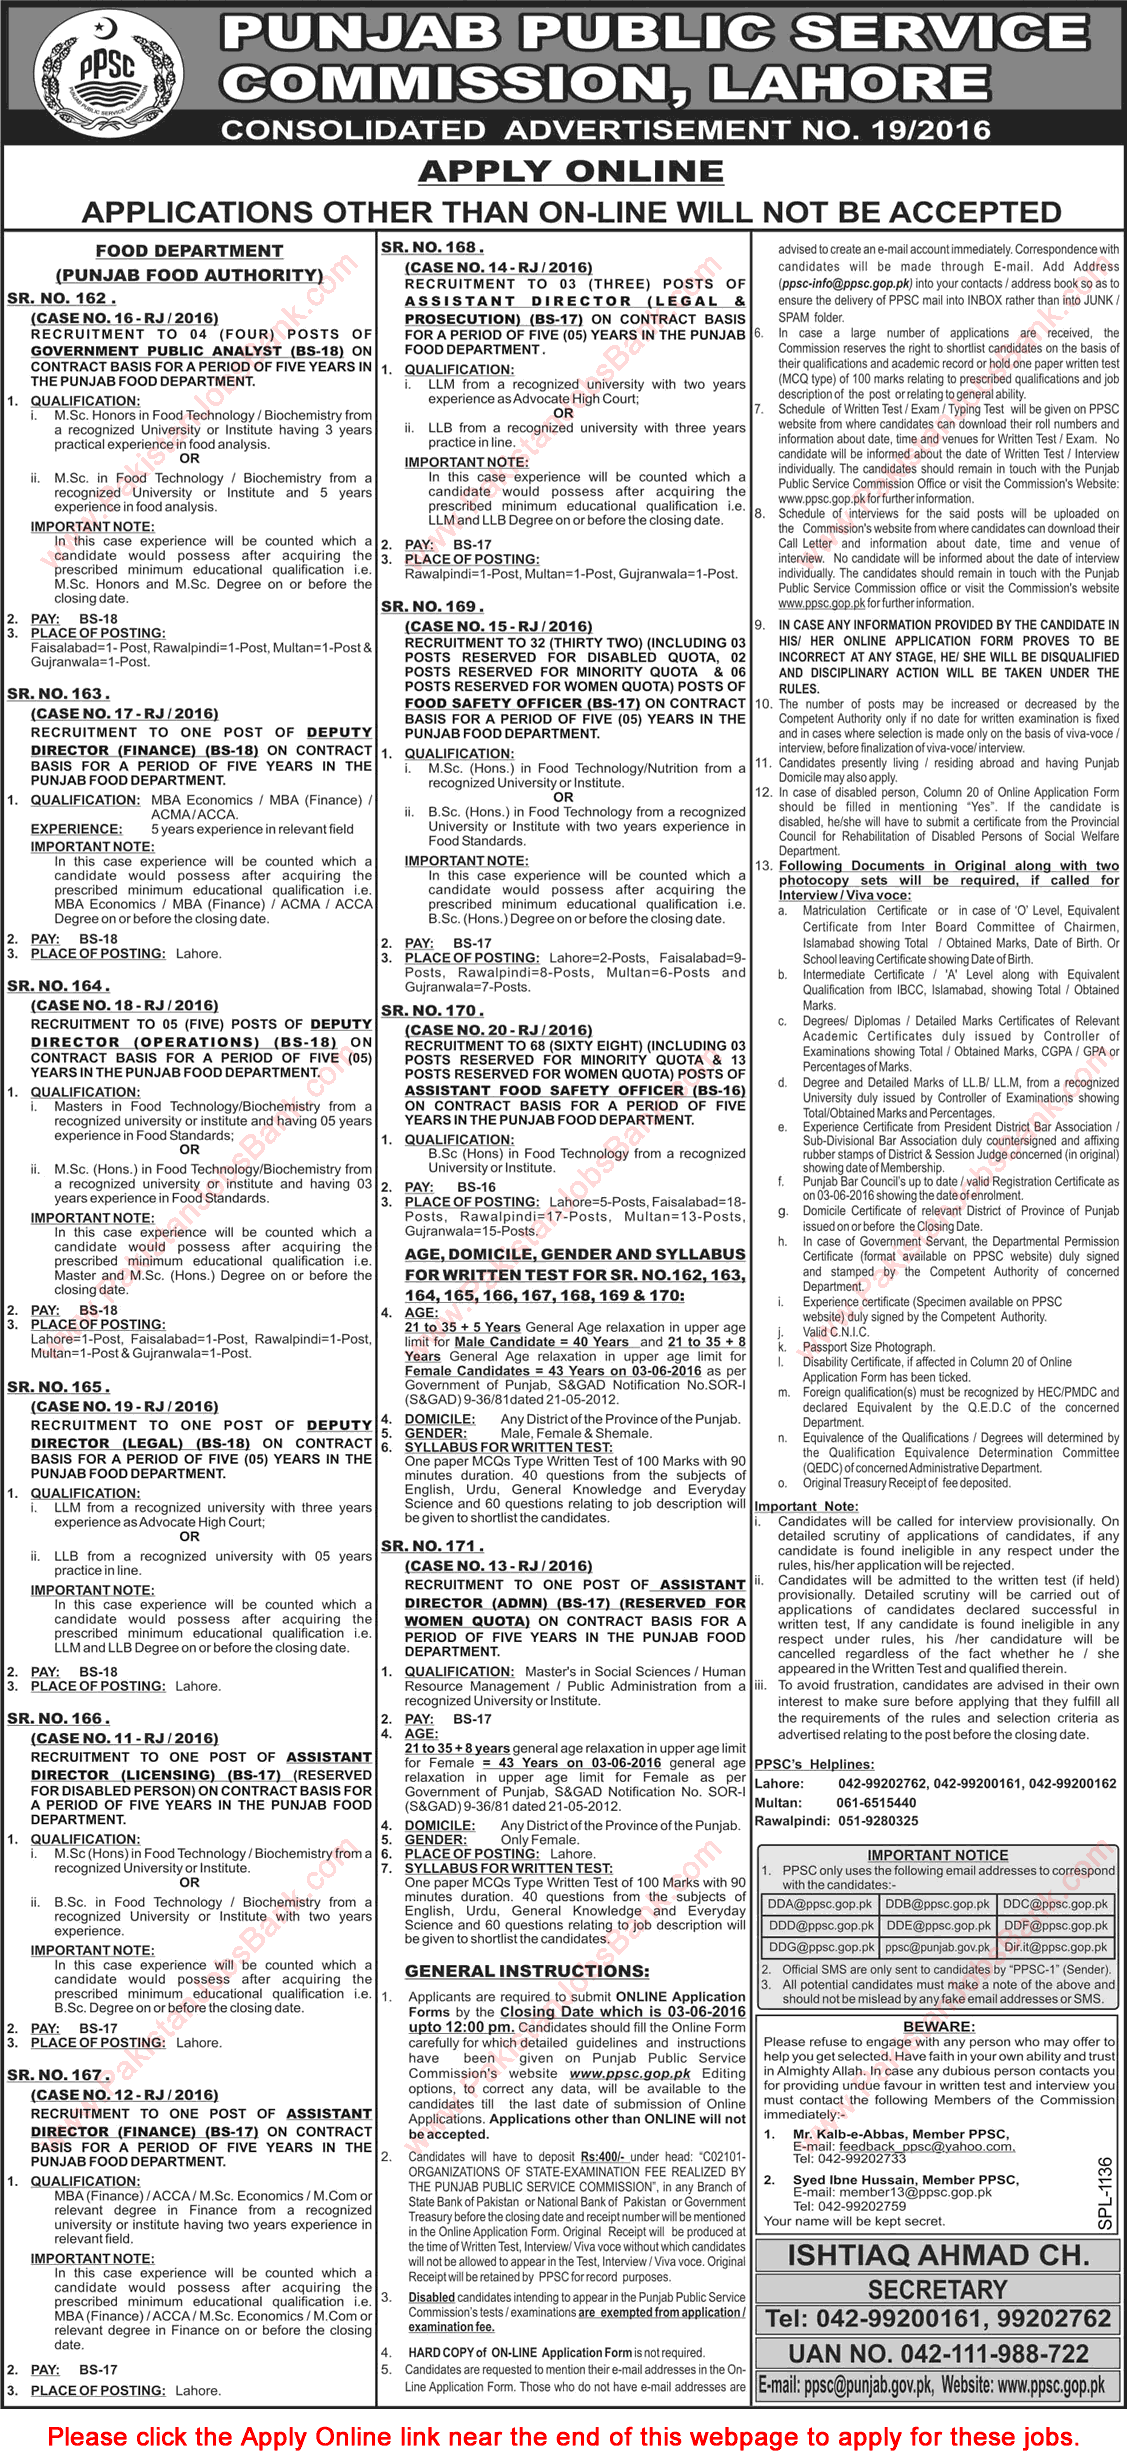 PPSC Jobs May 2016 Consolidated Advertisement No 19/2016 Apply Online Latest